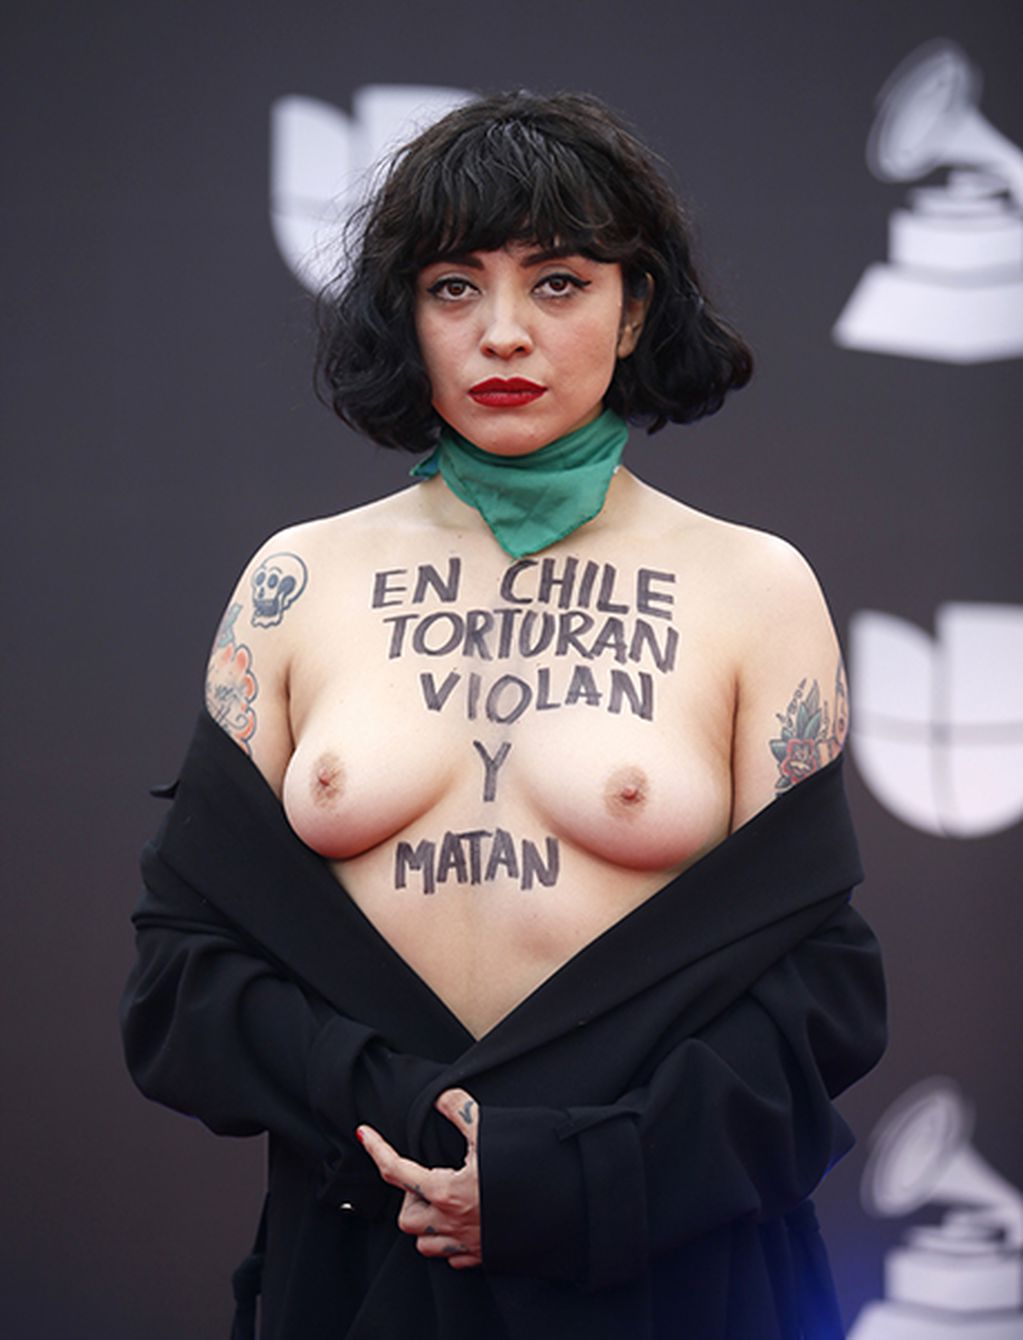 SENSITIVE MATERIAL. THIS IMAGE MAY OFFEND OR DISTURB. The 20th Annual Latin Grammy Awards - Arrivals - Las Vegas, Nevada, U.S., November 14, 2019 - Mon Laferte wears the message "In Chile they torture rape and kill" on her body. REUTERS/Danny Moloshok SENSITIVE MATERIAL. THIS IMAGE MAY OFFEND OR DISTURB.